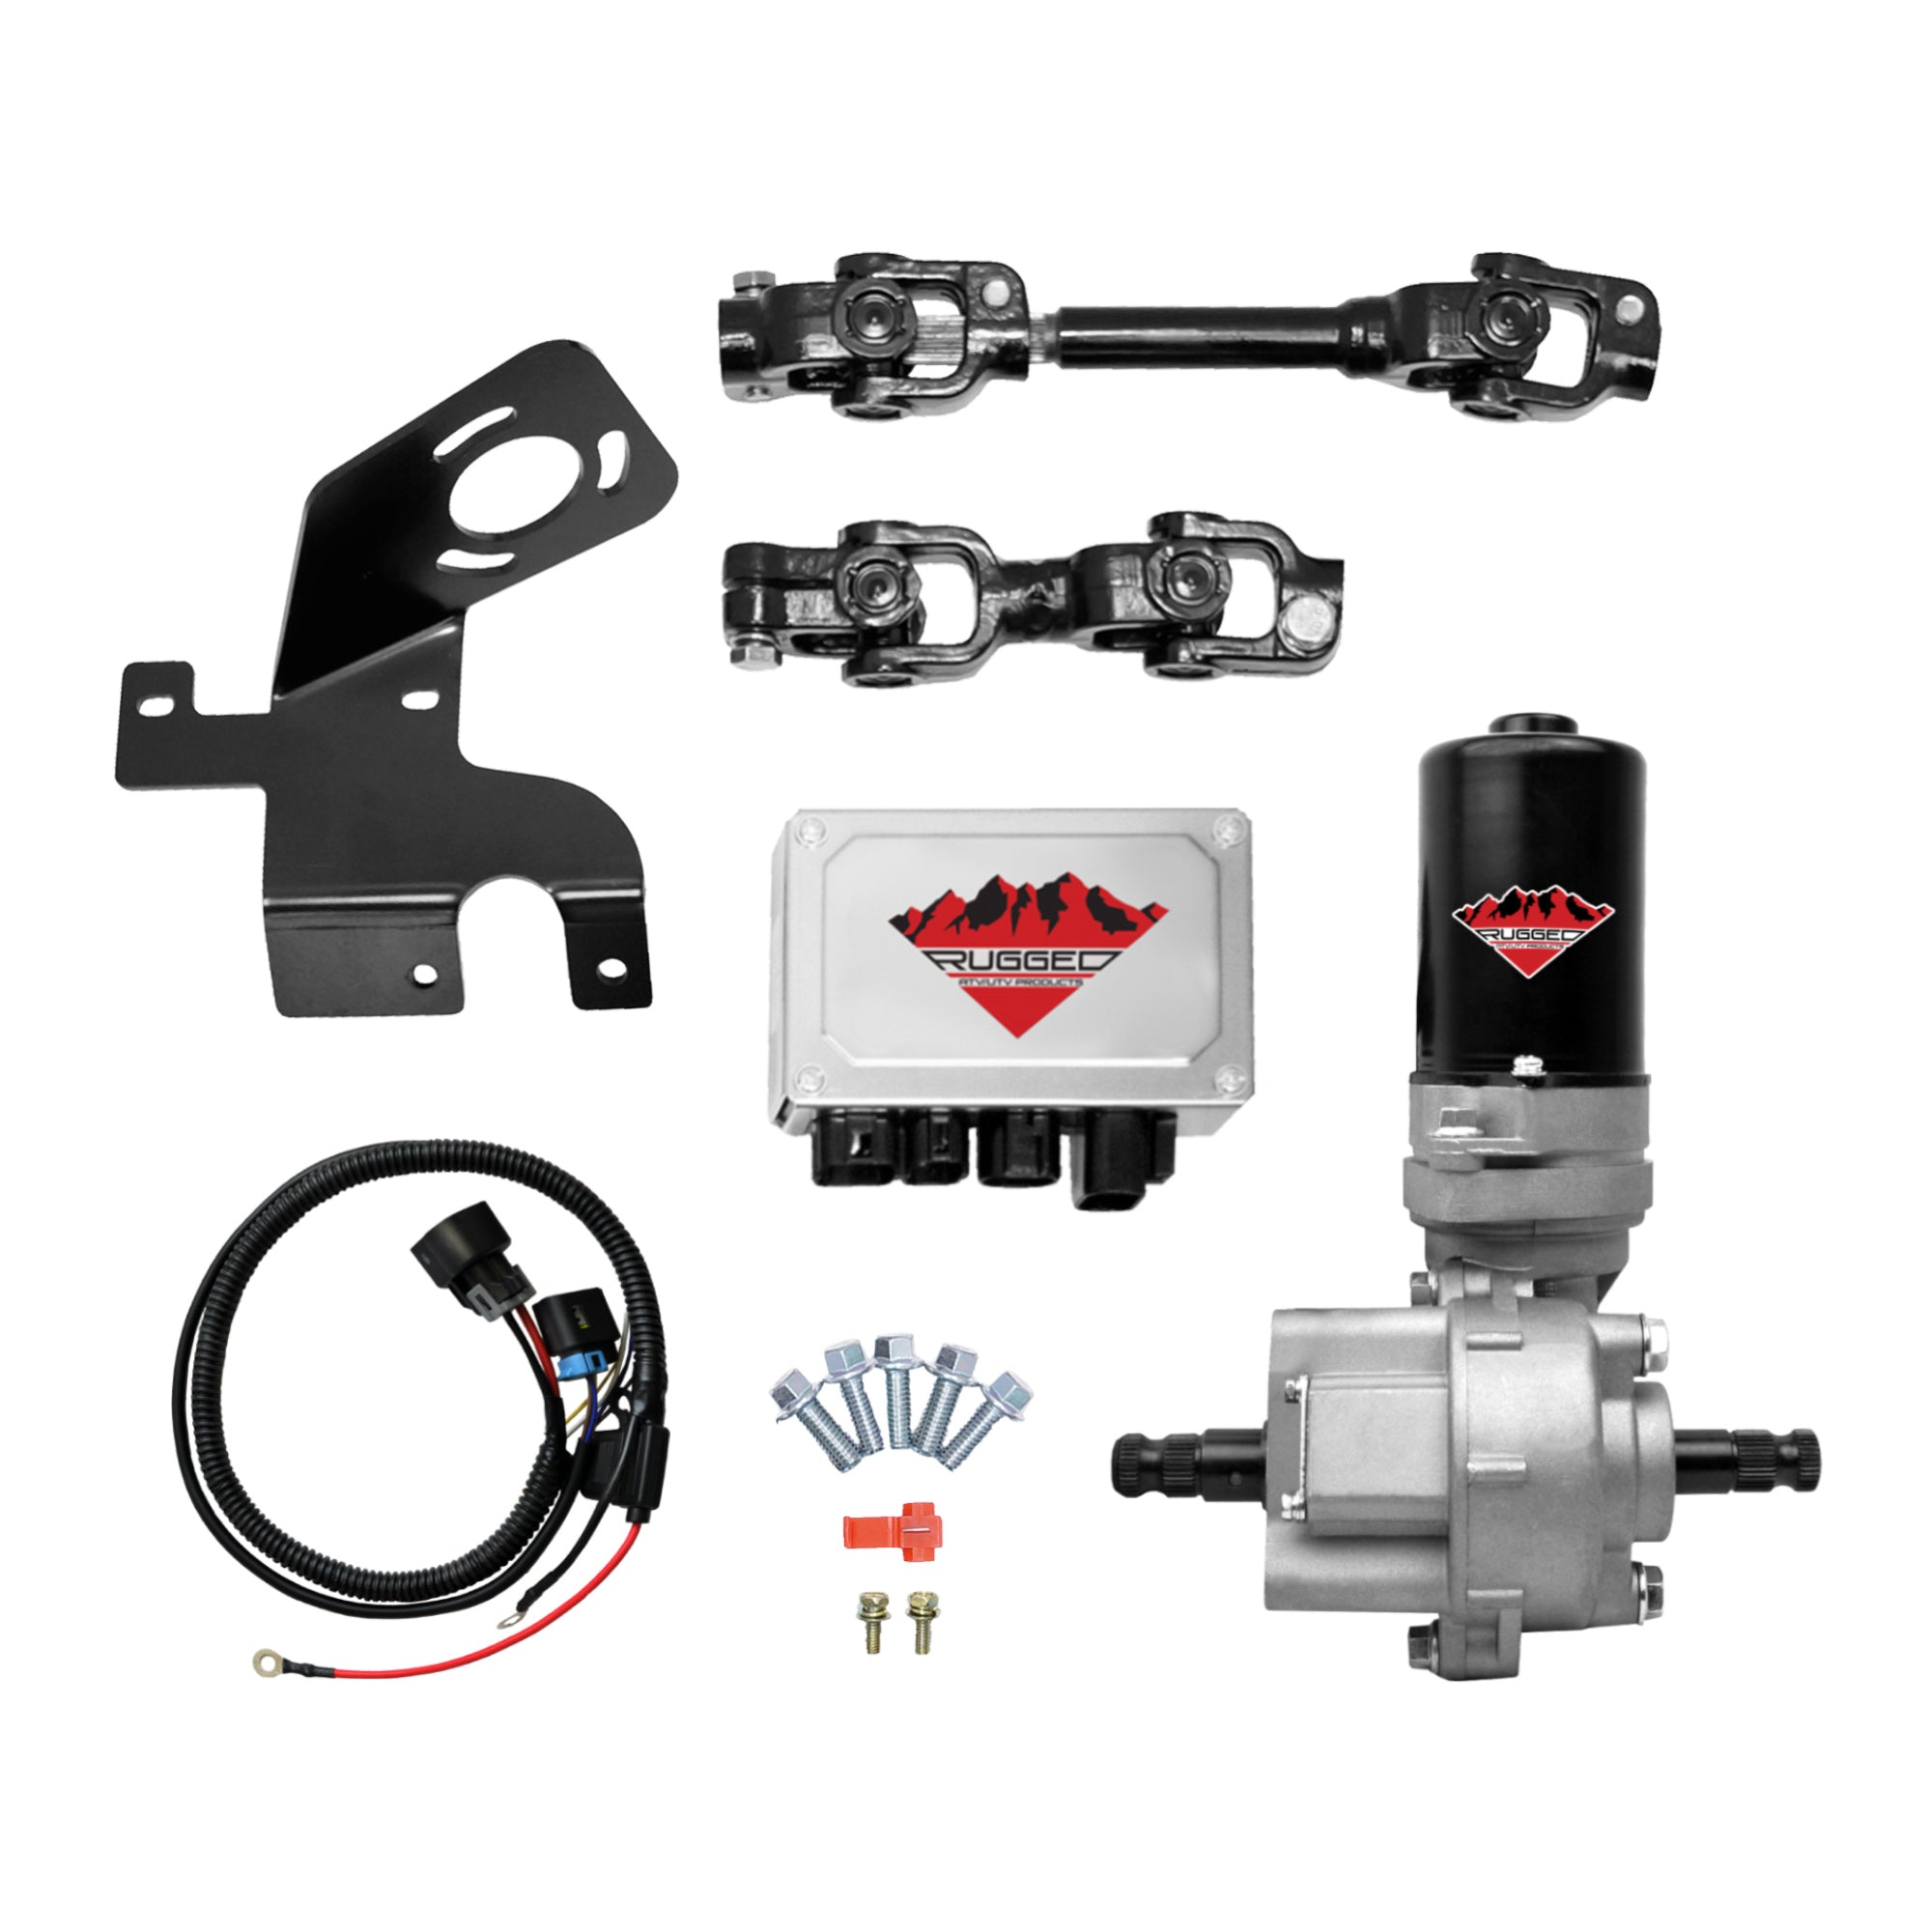 Electric Power Steering Kit for Honda Big Red 